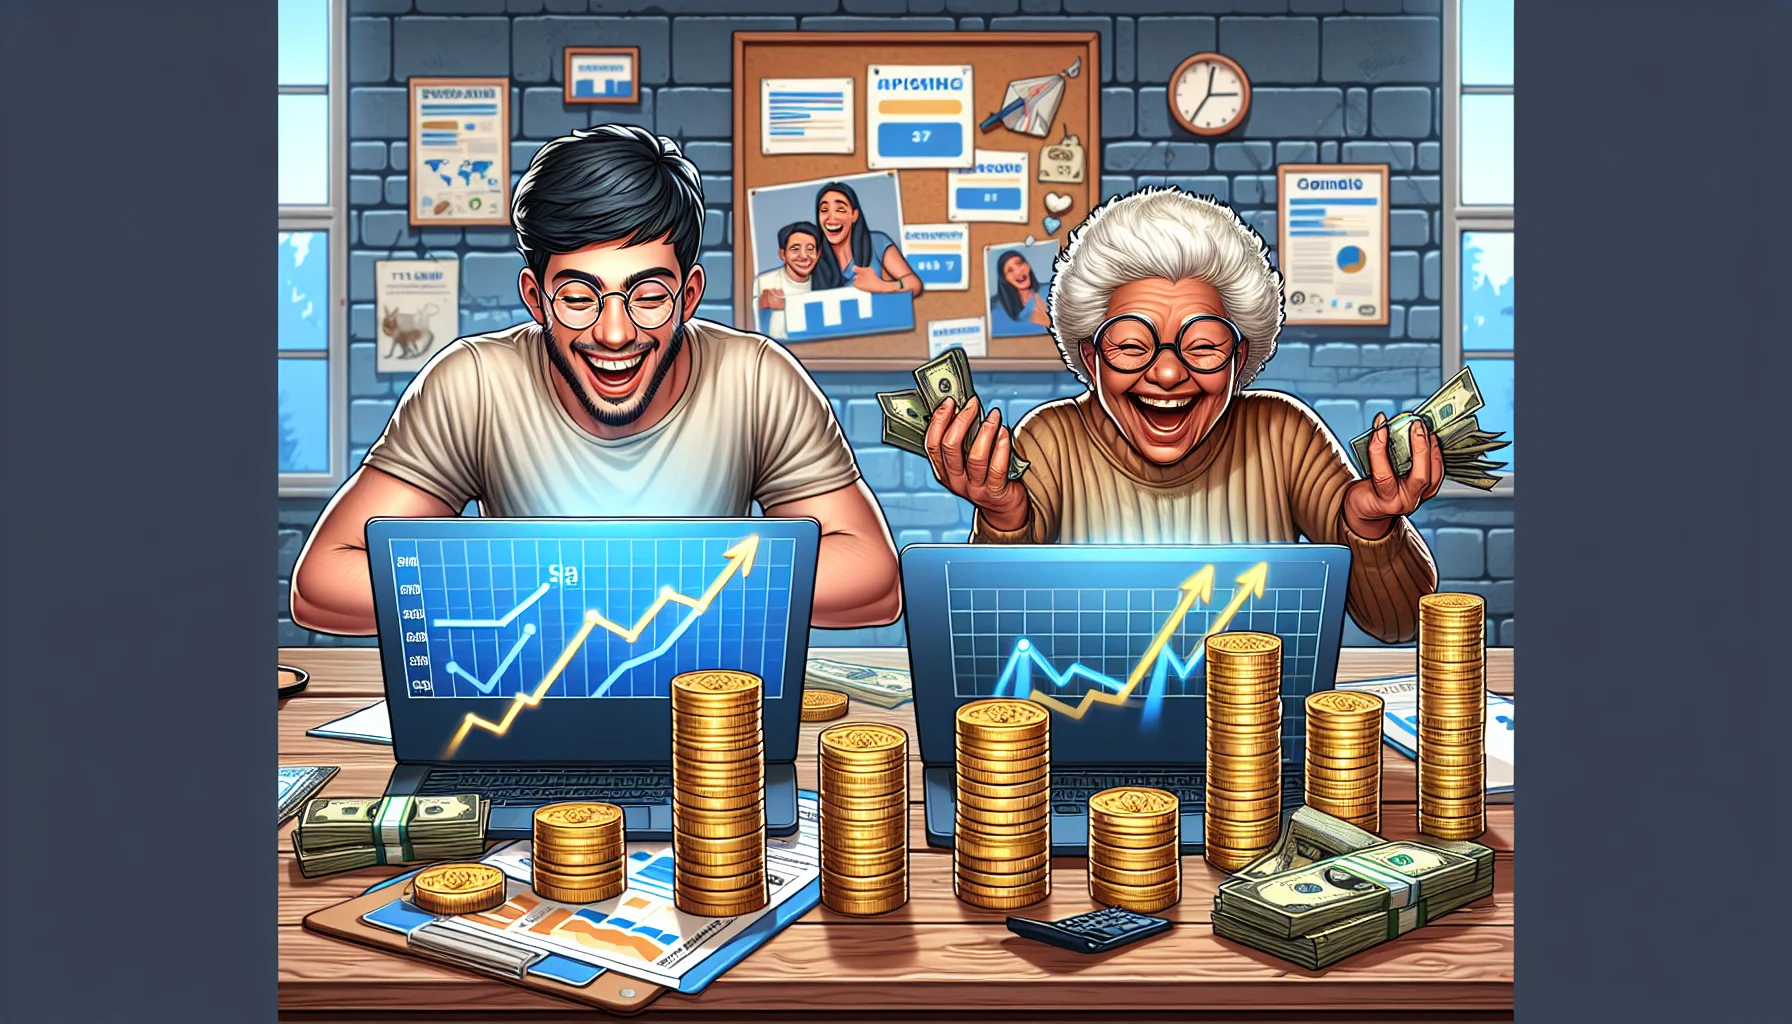 Imagine a comedic and realistic scene depicting the affiliate program of an unspecified online therapy platform. Highlight the potential of income generation in a digital environment. Set in a cozy home office, a young Hispanic man and an elderly Black woman are joyously reviewing their laptops' screens, which display rising graphs and positive numbers, symbolizing their growing online earnings. Cartoonish stacks of gold coins and banknotes are bouncing on their desks, adding a lighter and playful tone to the scene. Subtle cues in the background, like promotional posters and a miniature globe, hint at the global reach of online affiliate programs.